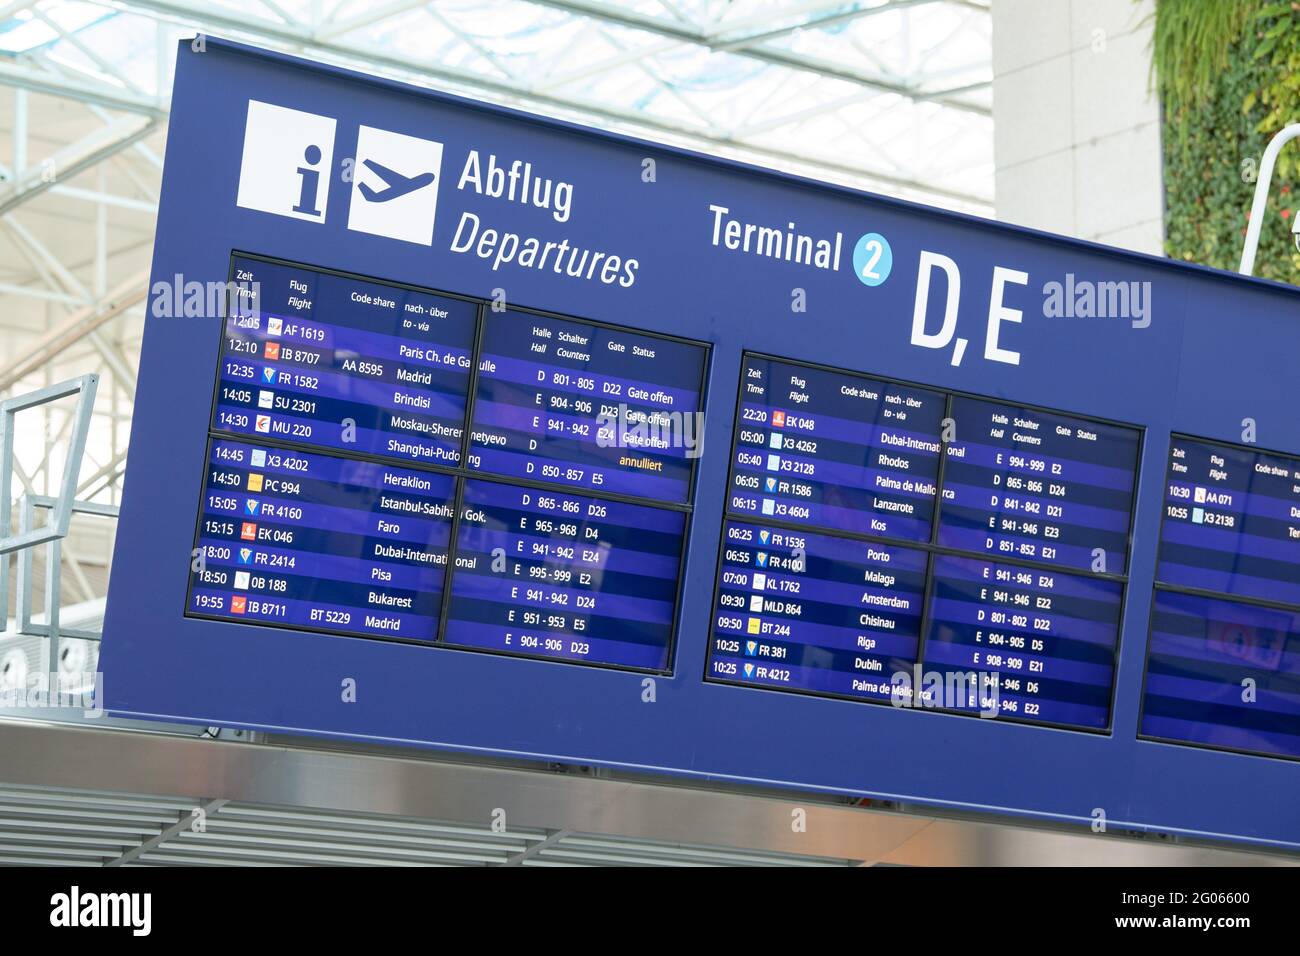 01 2021, Hessen, Frankfurt/Main: For the first time in a year, flights are again displayed on the Terminal display board at Frankfurt Airport. The terminal had been closed for